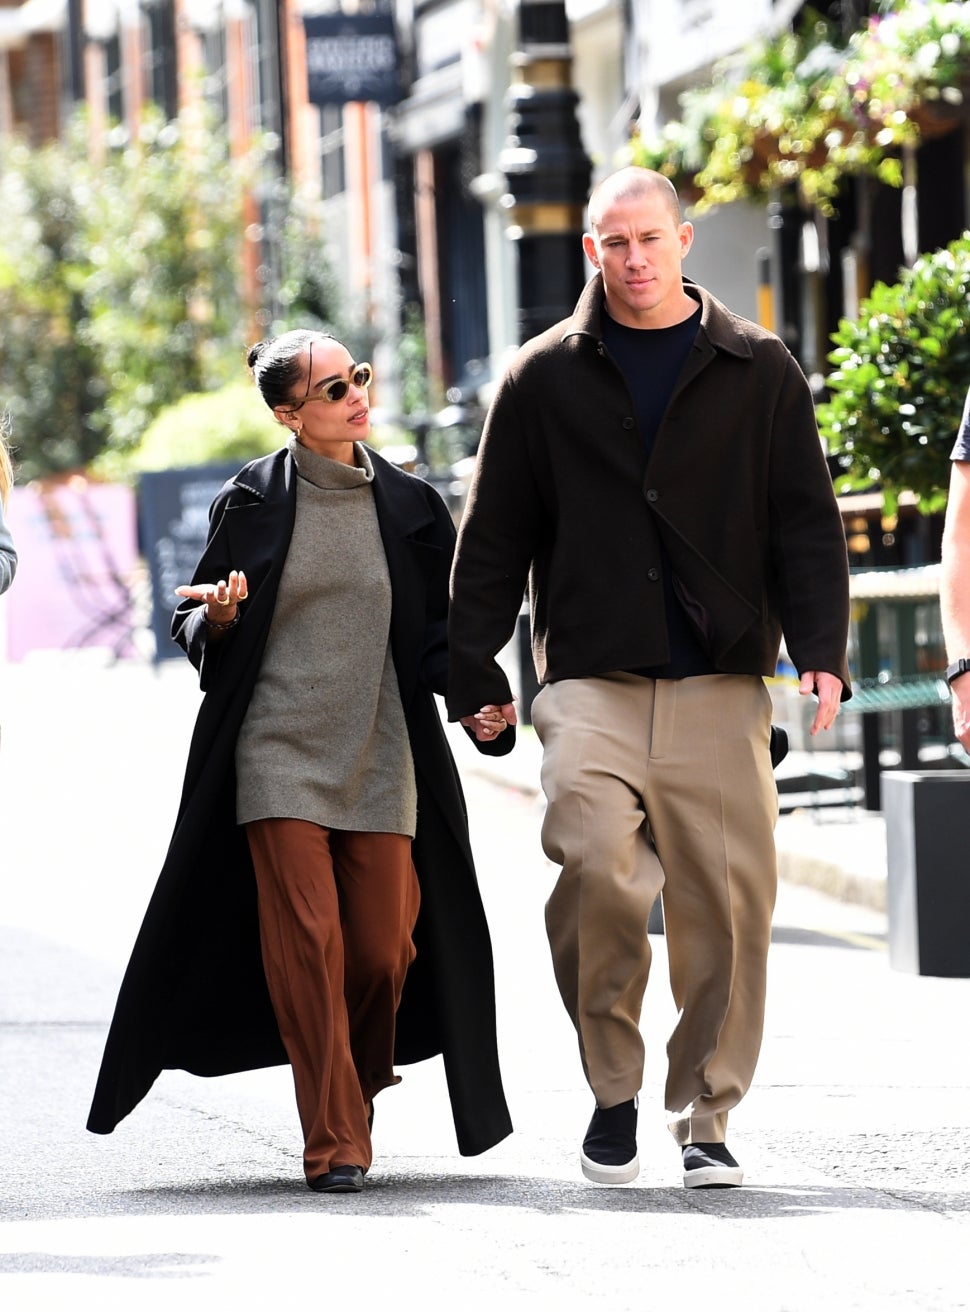 Channing Tatum and Zoe Kravitz hold hands in London